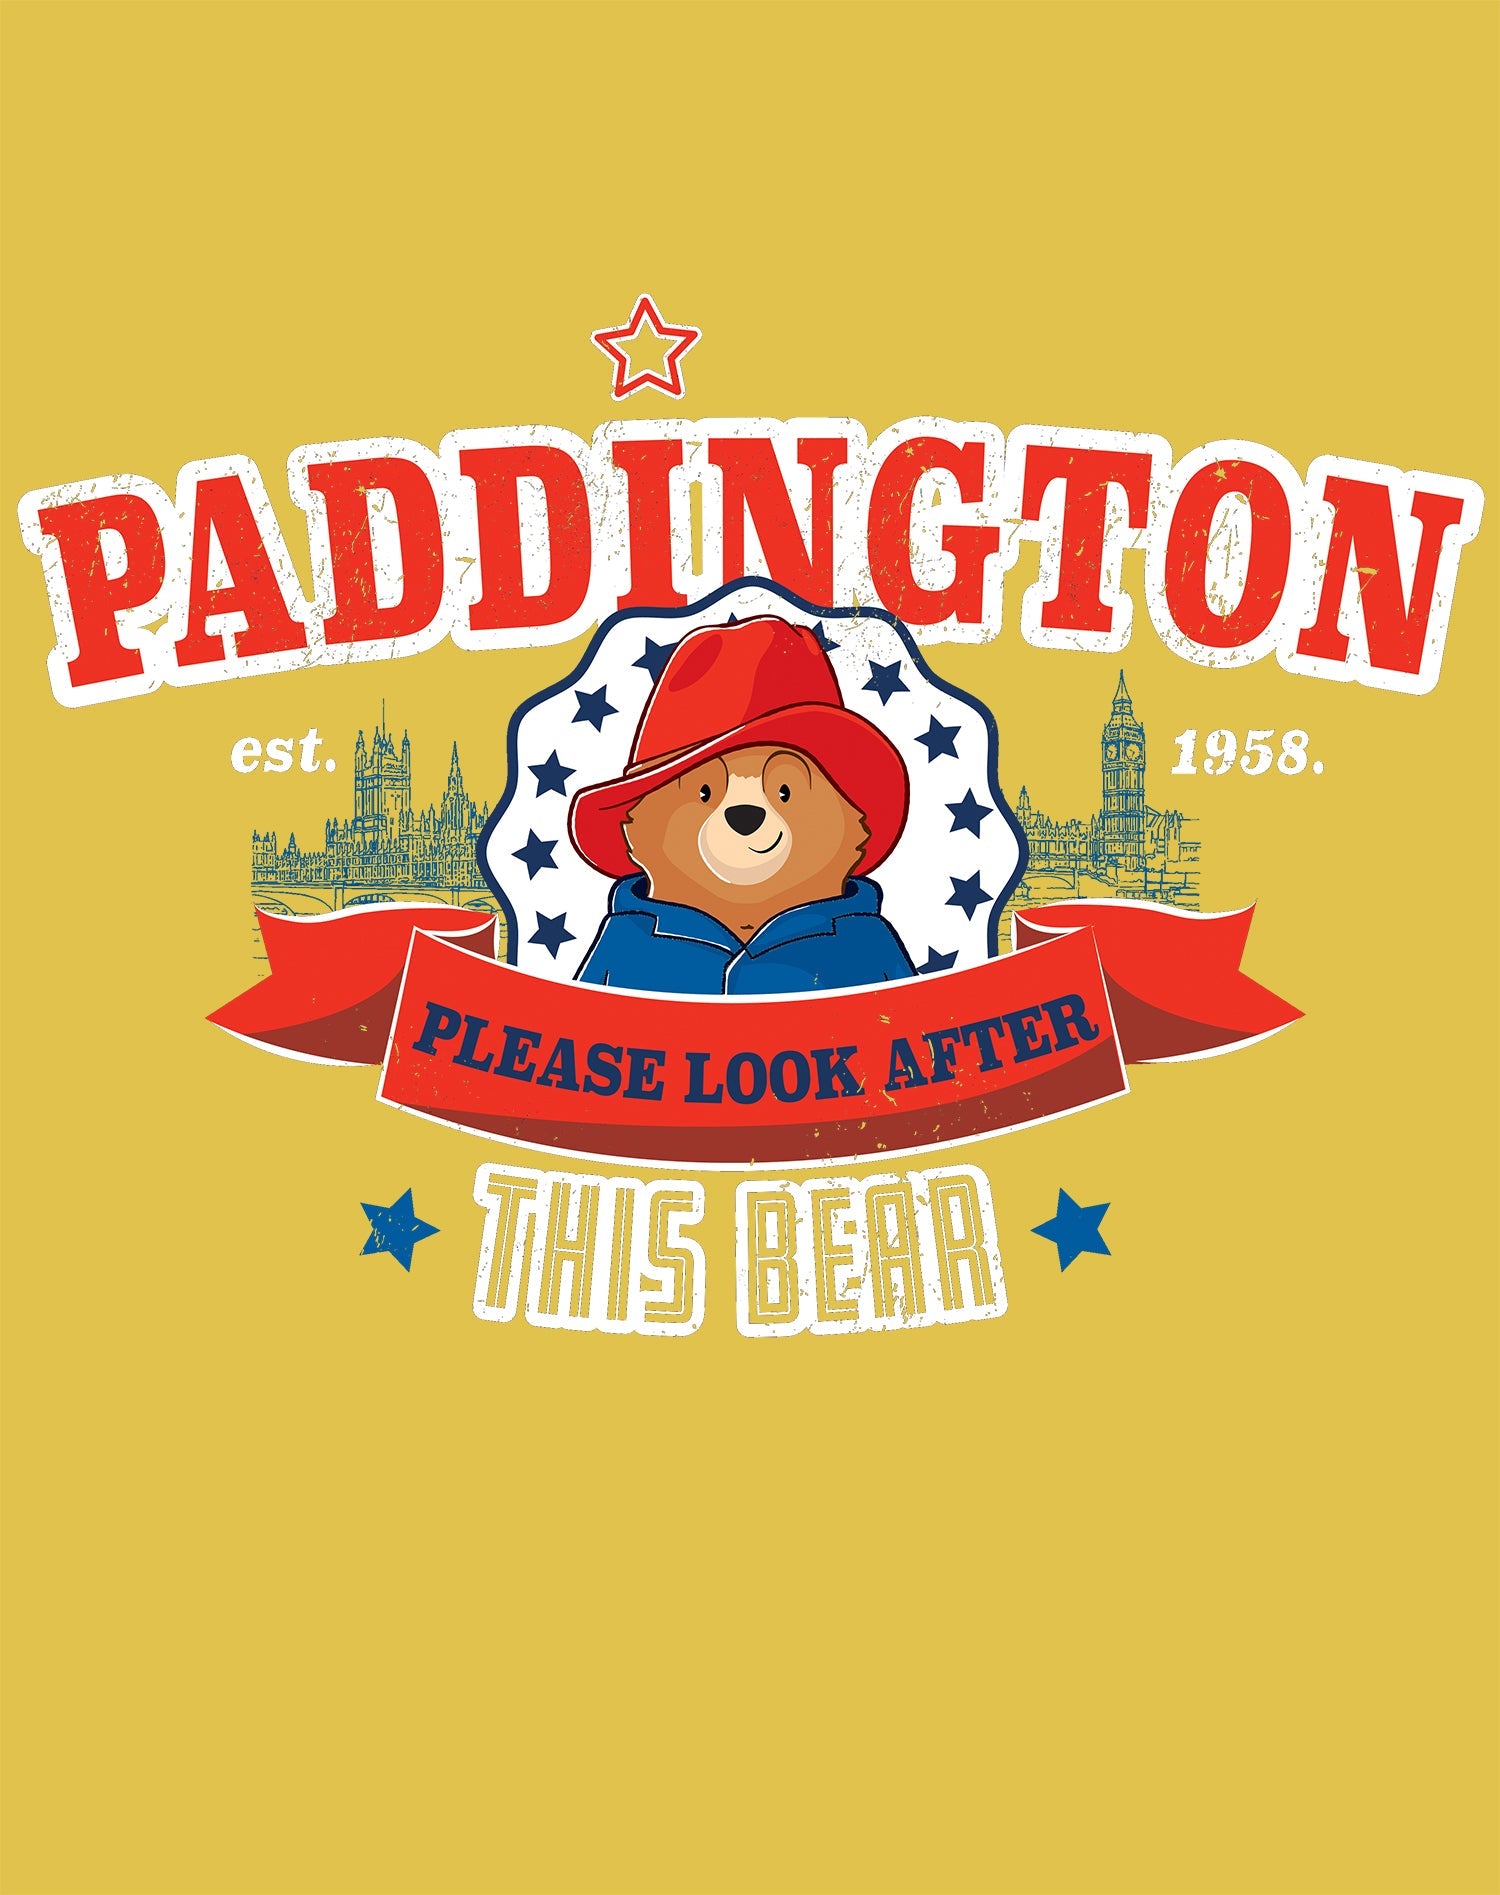 Paddington Bear Collegiate London Please Look Saturated Official Youth T-Shirt